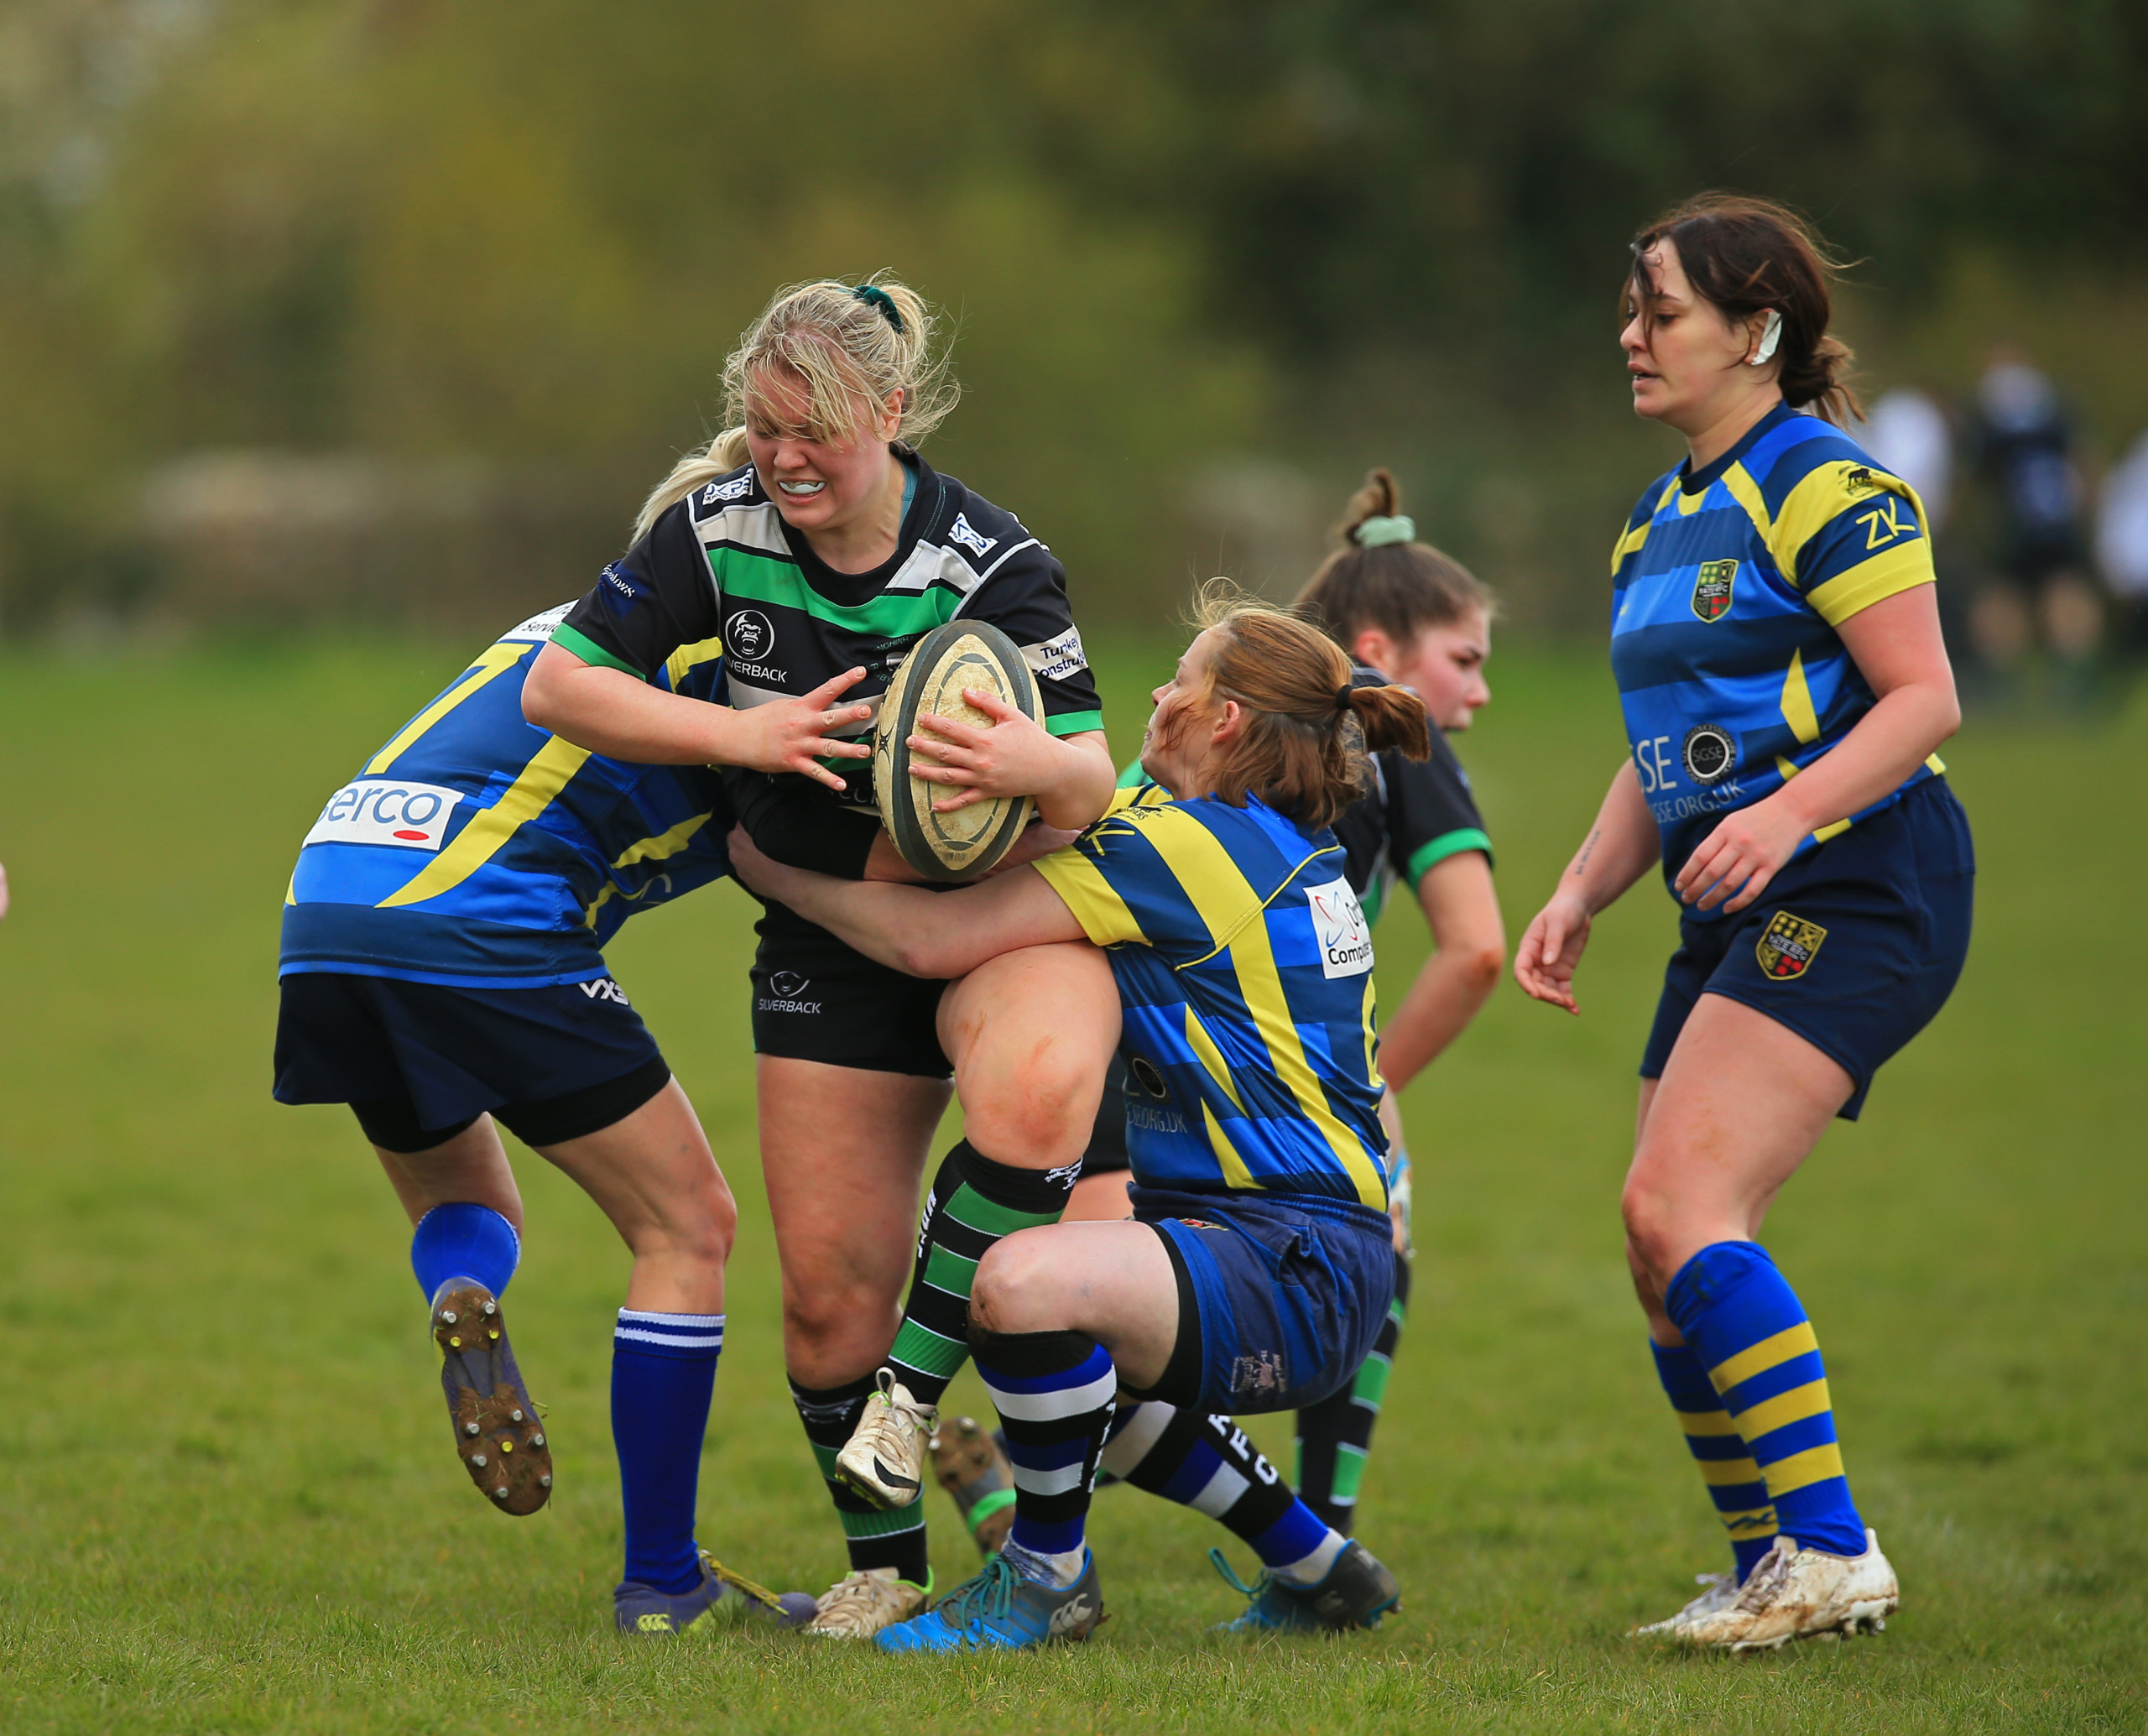 17 Minchinhampton Ladies RFC captain Amy Barnett tacked hard with the ball scaled | In pictures: Minch women play inaugural game